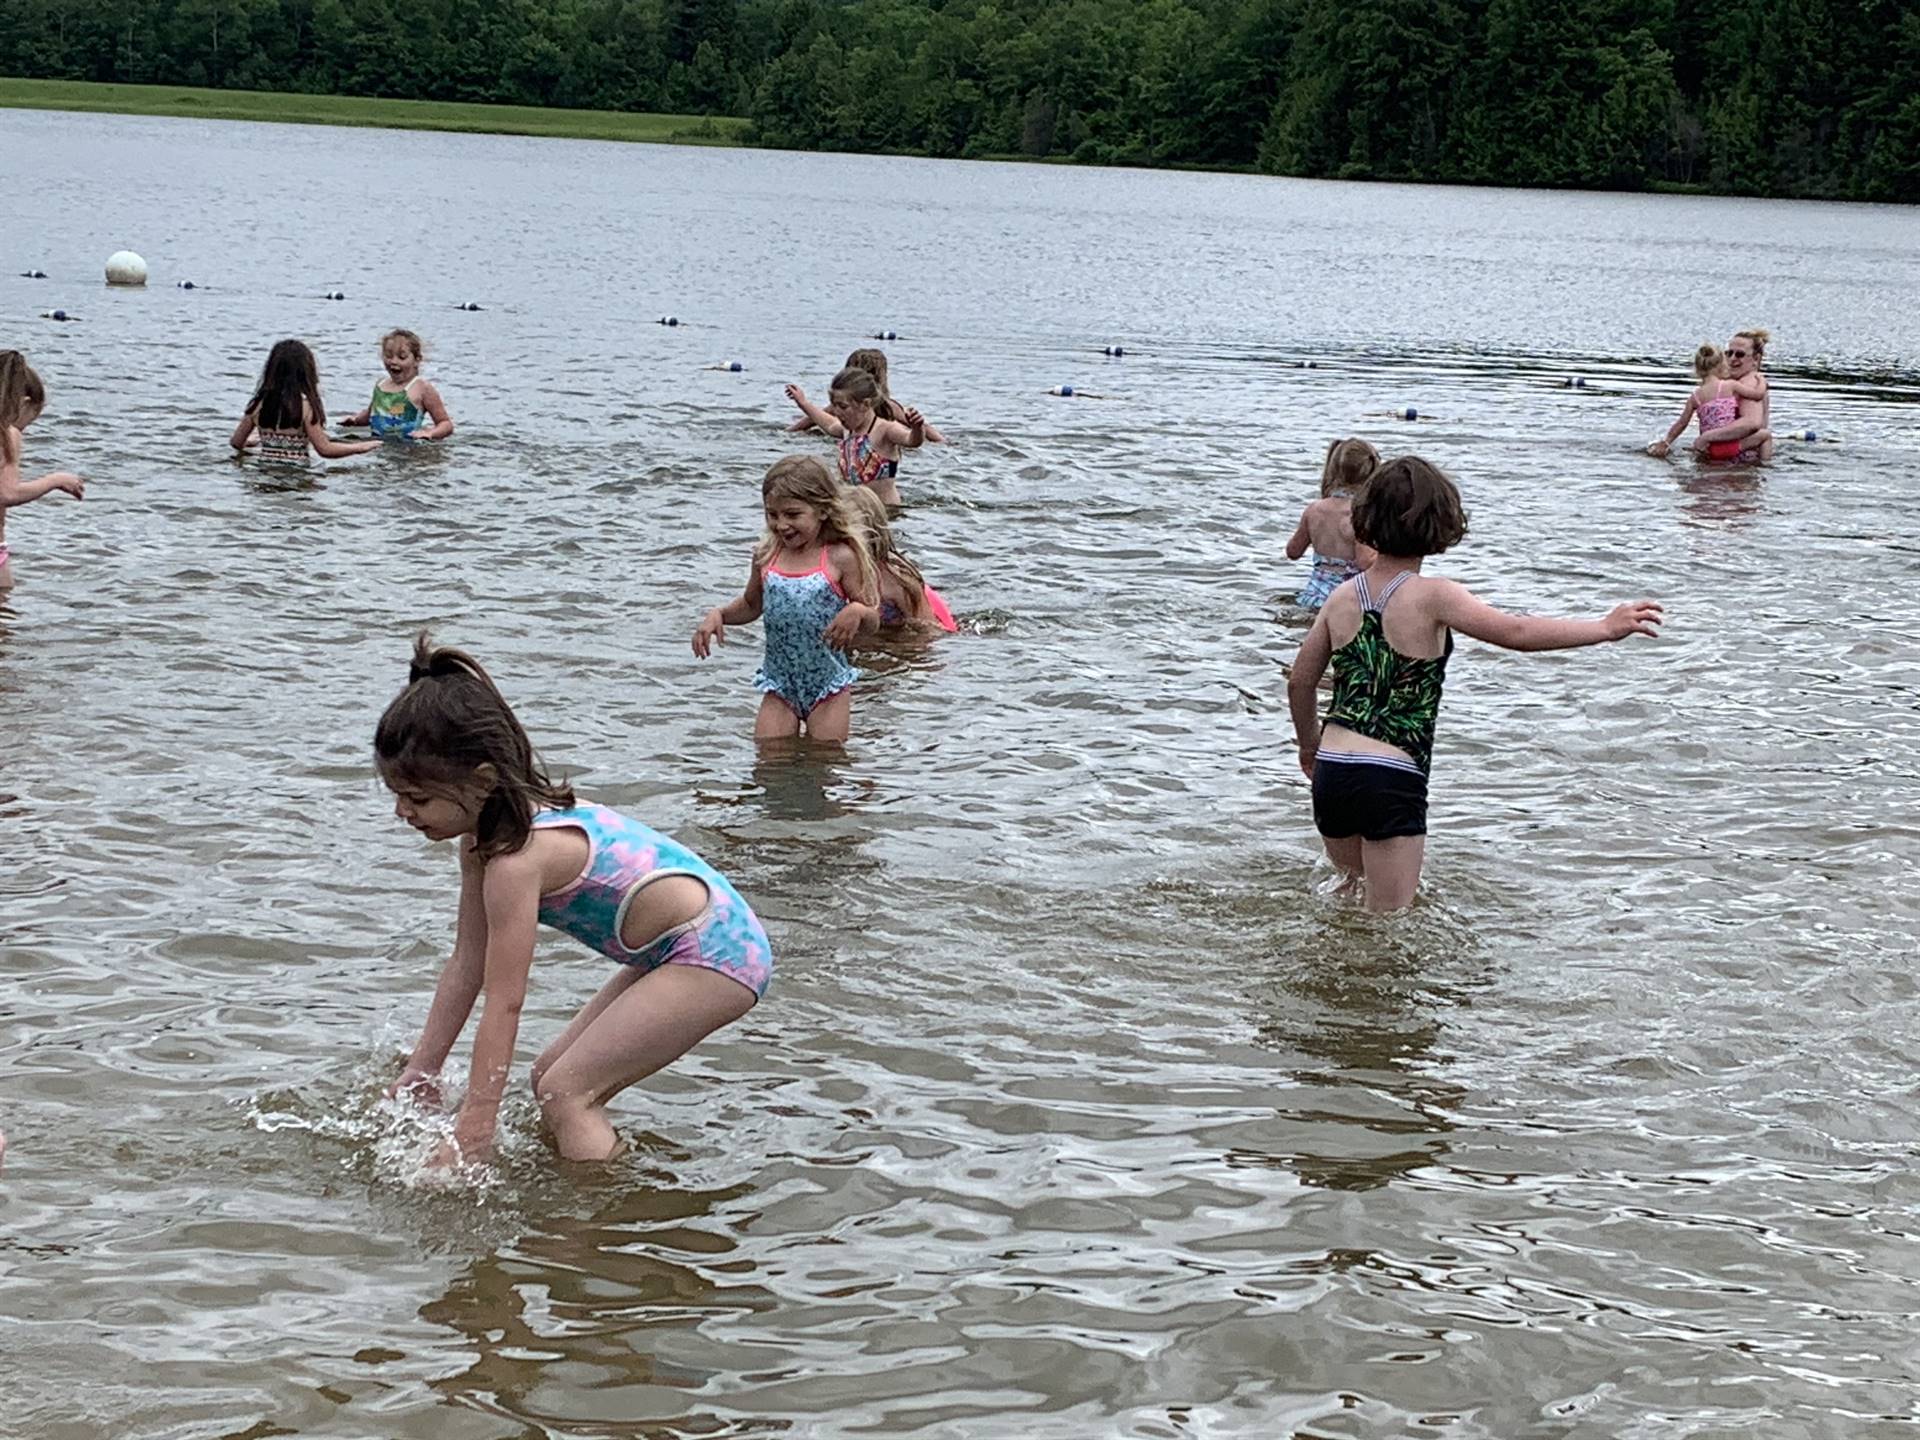 Students playing in the water.